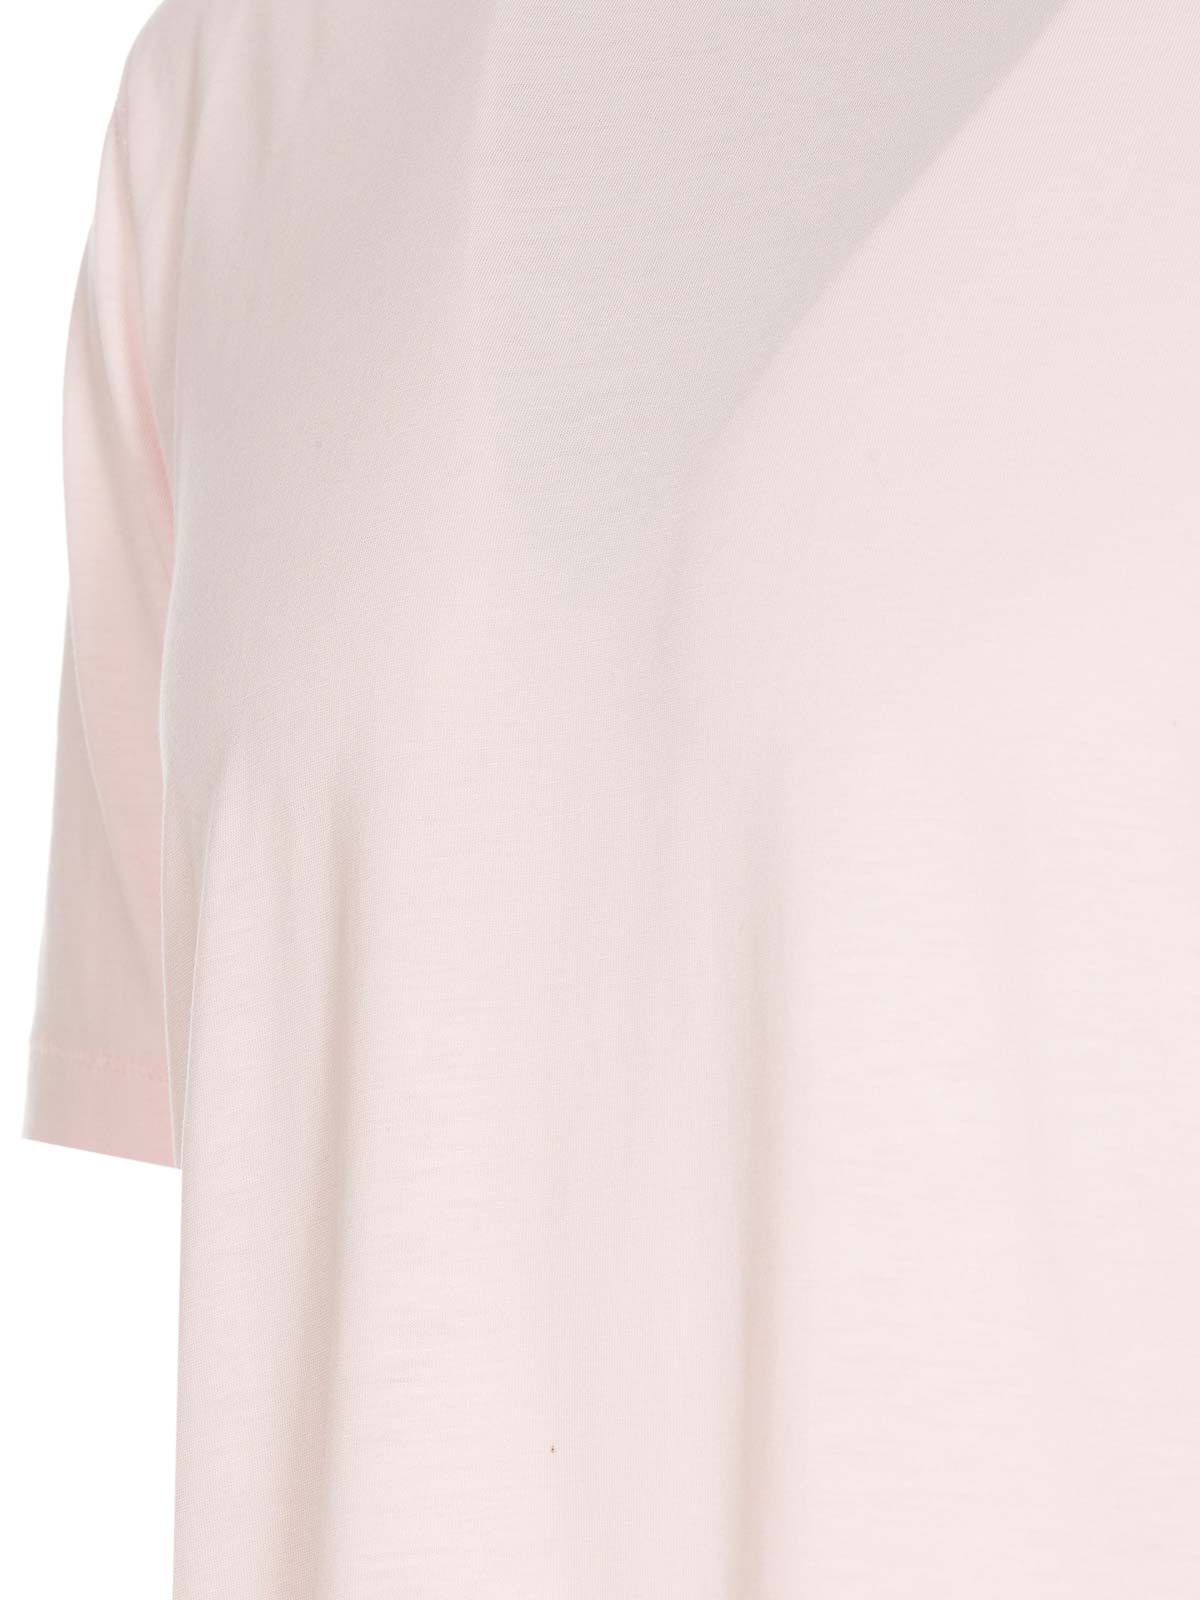 Shop Tom Ford Camiseta - Color Carne Y Neutral In Nude & Neutrals